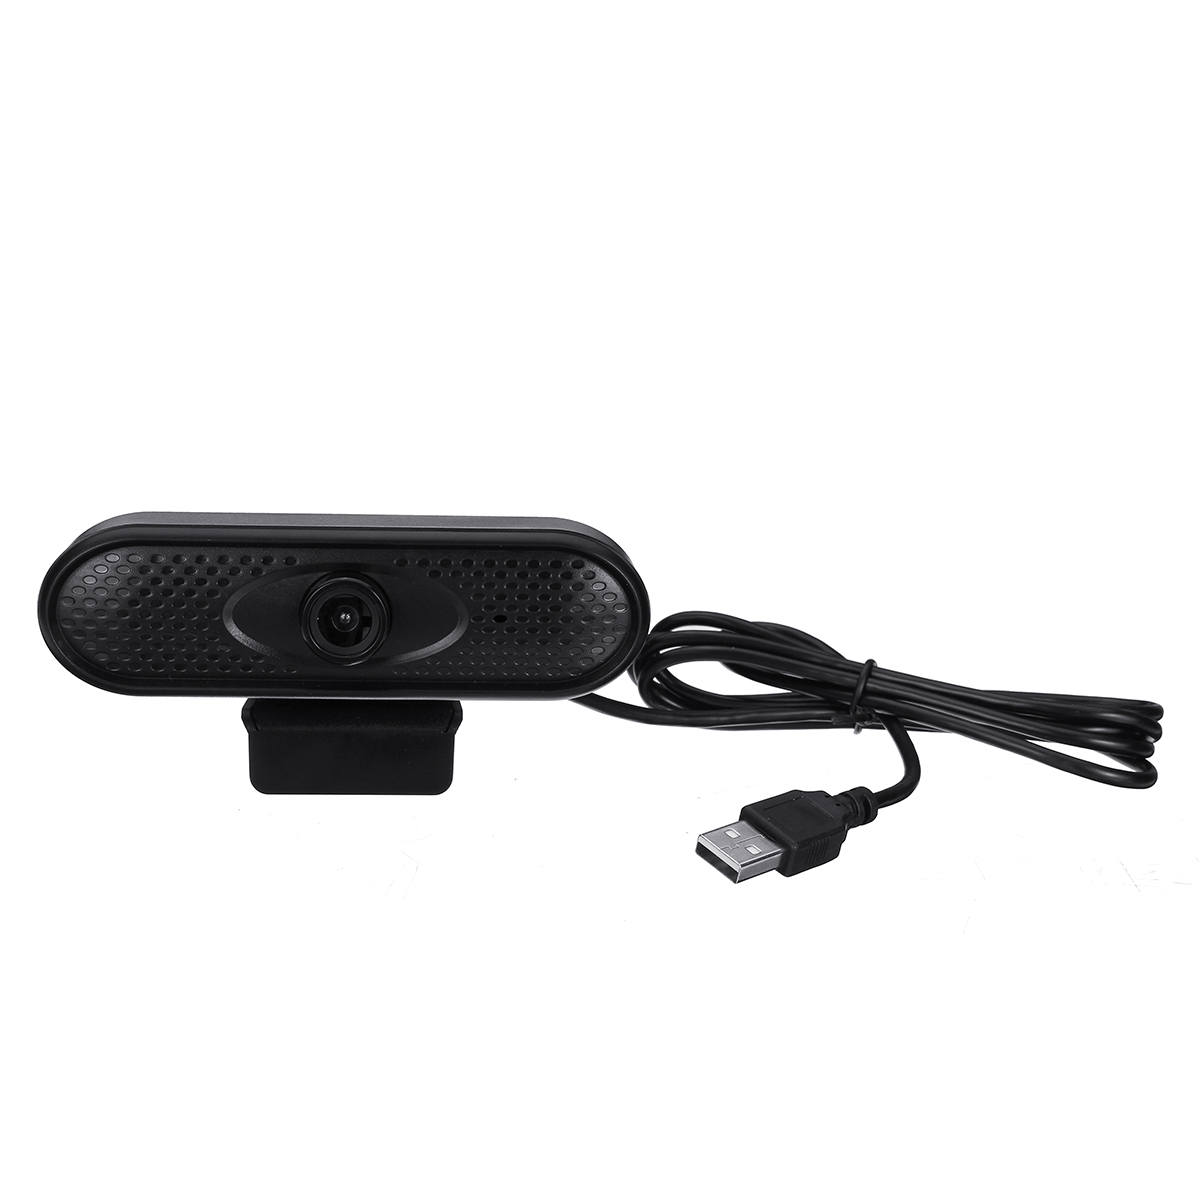 1080P-HD-USB-Webcam-Conference-Live-Manual-Focus-Computer-Camera-Built-in-Omni-directional-Micphone--1674541-13